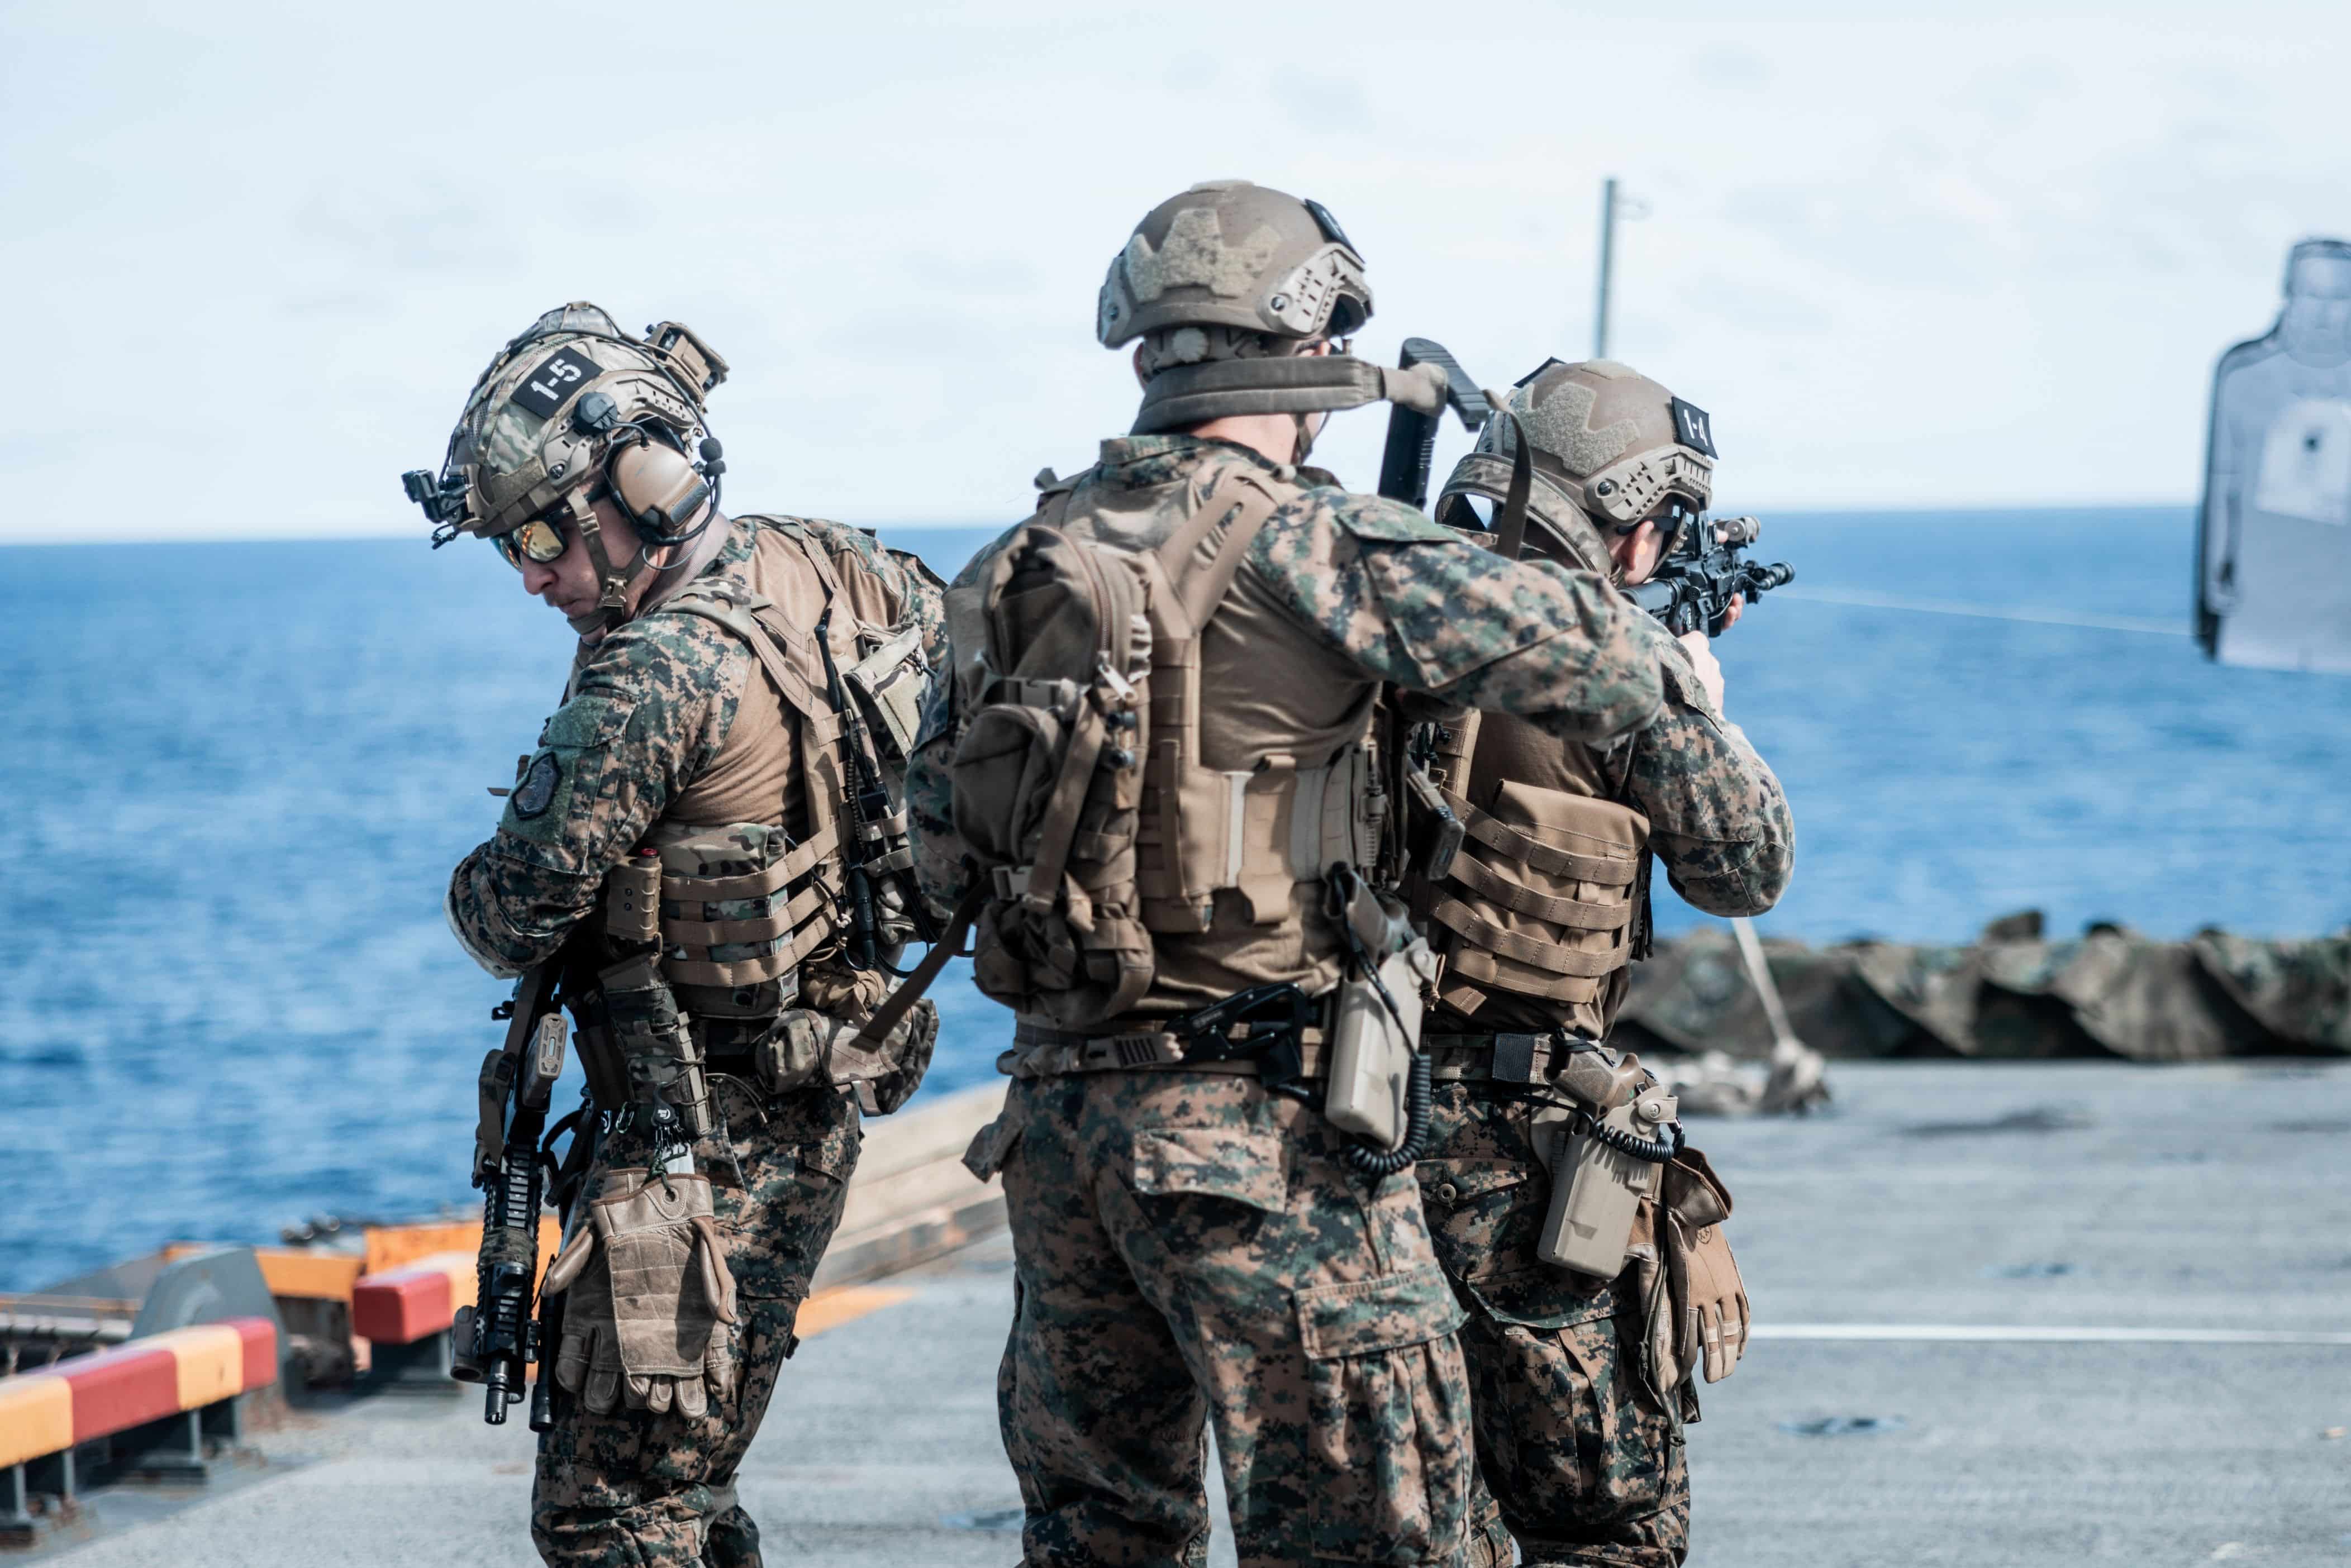 U.S. Marines with the 26th Marine Expeditionary Unit (Special Operations Capable)’s (MEU(SOC)) Maritime Special Purpose Force conduct close quarters tactics during a live-fire range aboard the Wasp-class amphibious assault ship USS Bataan (LHD 5), Atlantic Ocean, July 19, 2023.